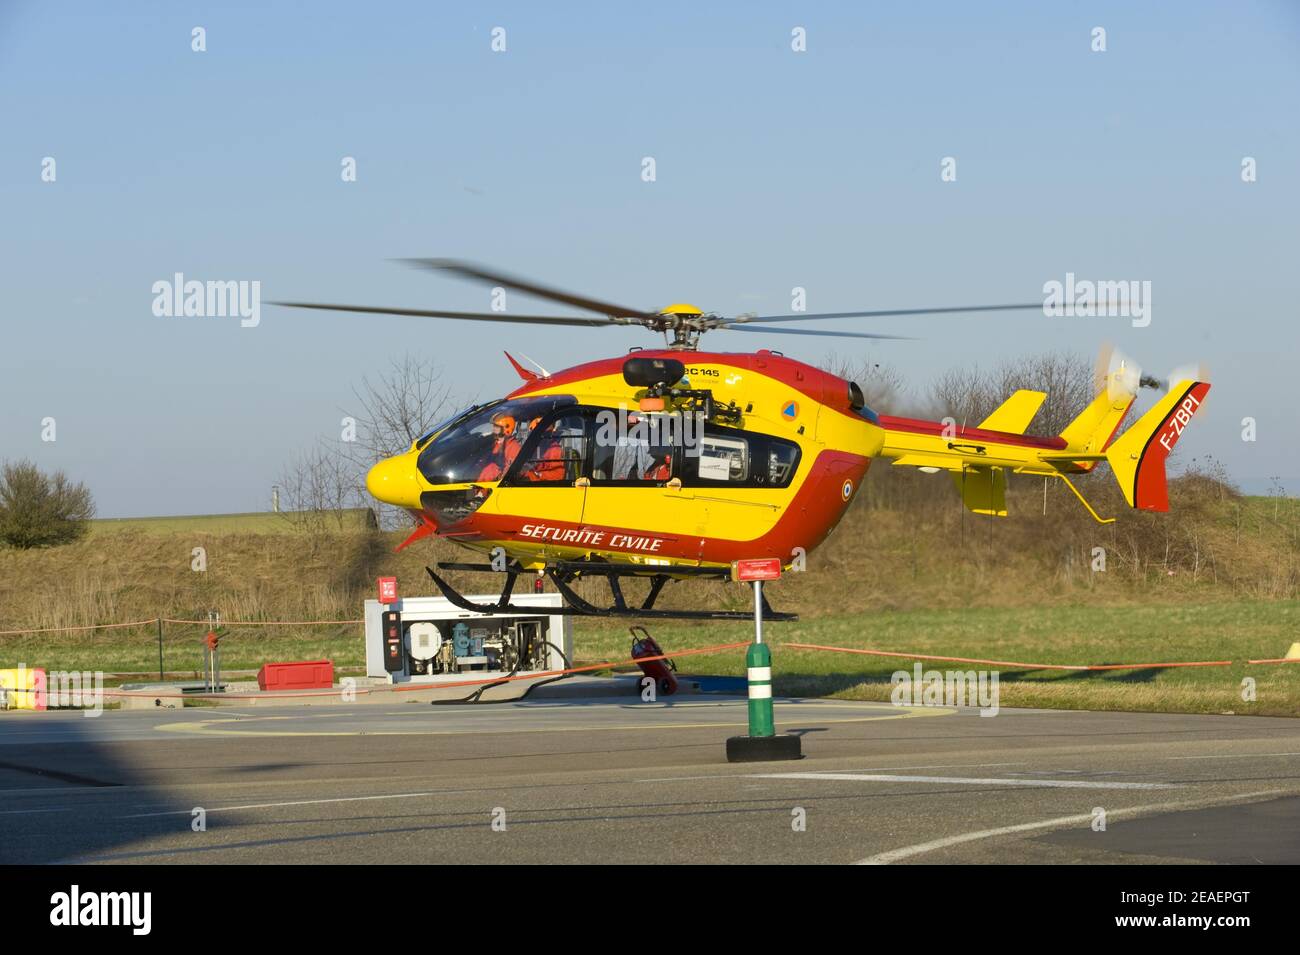 Civil security helicopter taking off from strasbourg airport Stock Photo